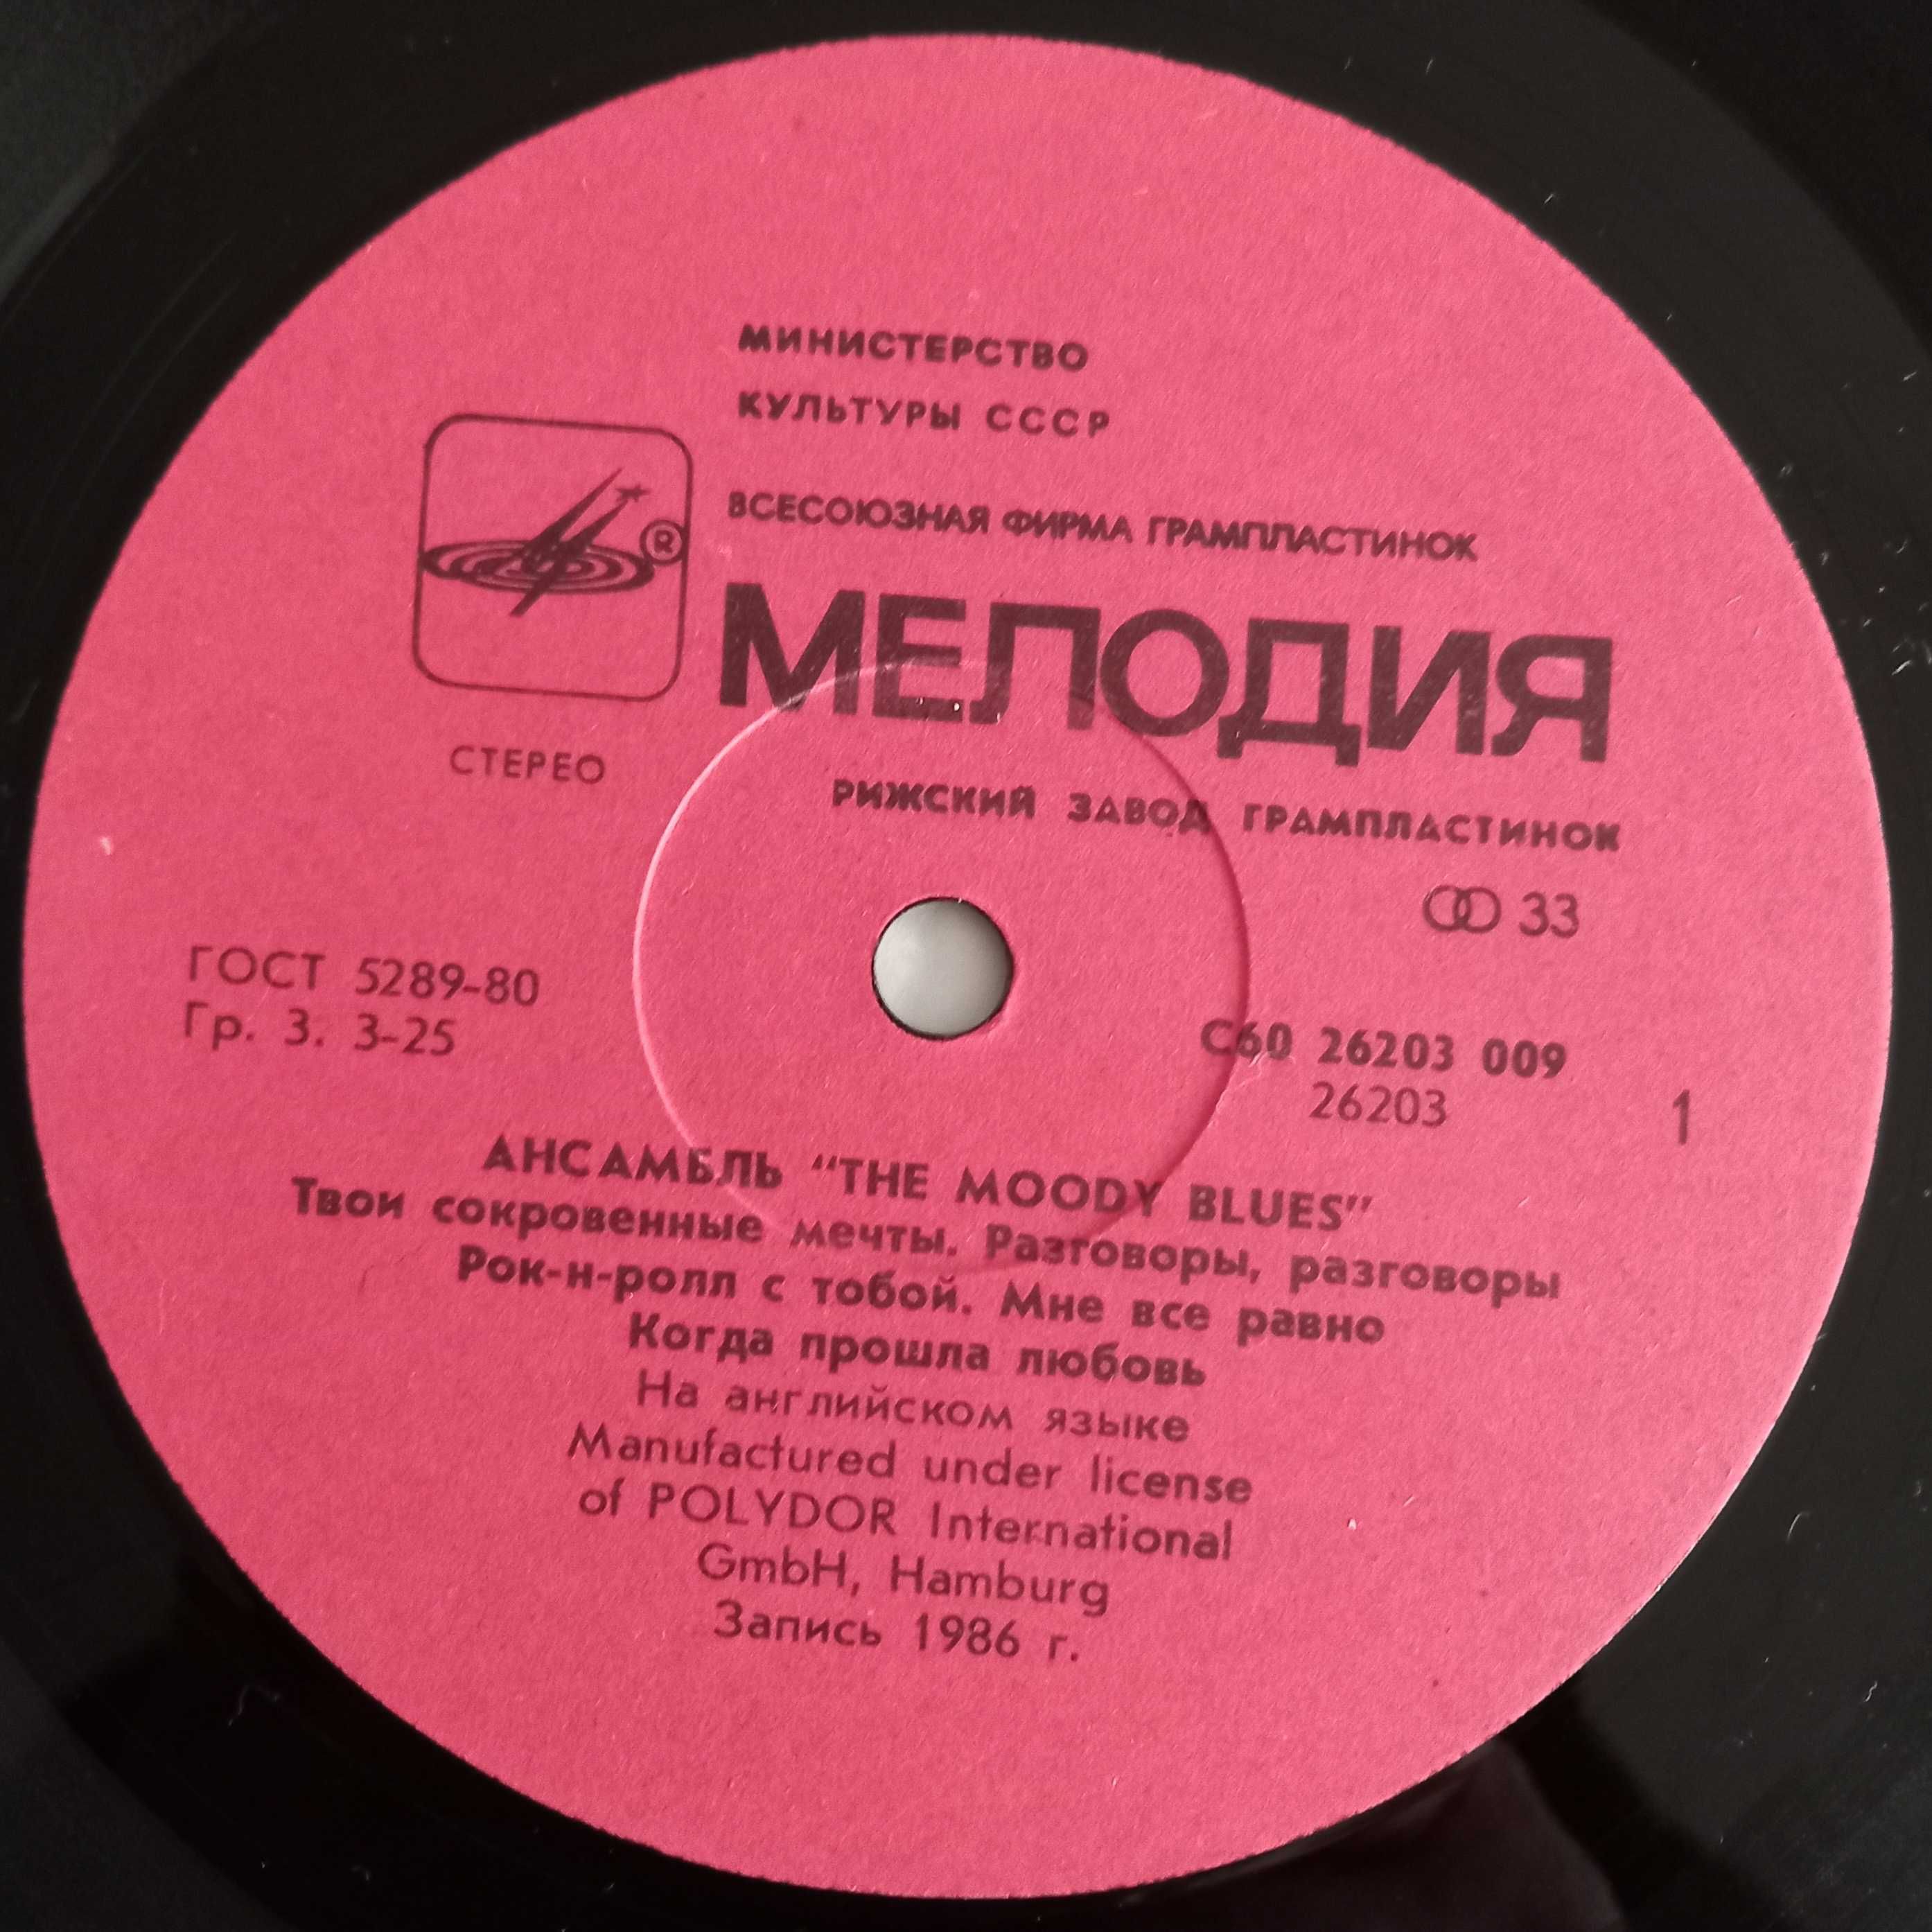 LP The Moody Blues "The Other Side Of Life", "Мелодия", 1987 год